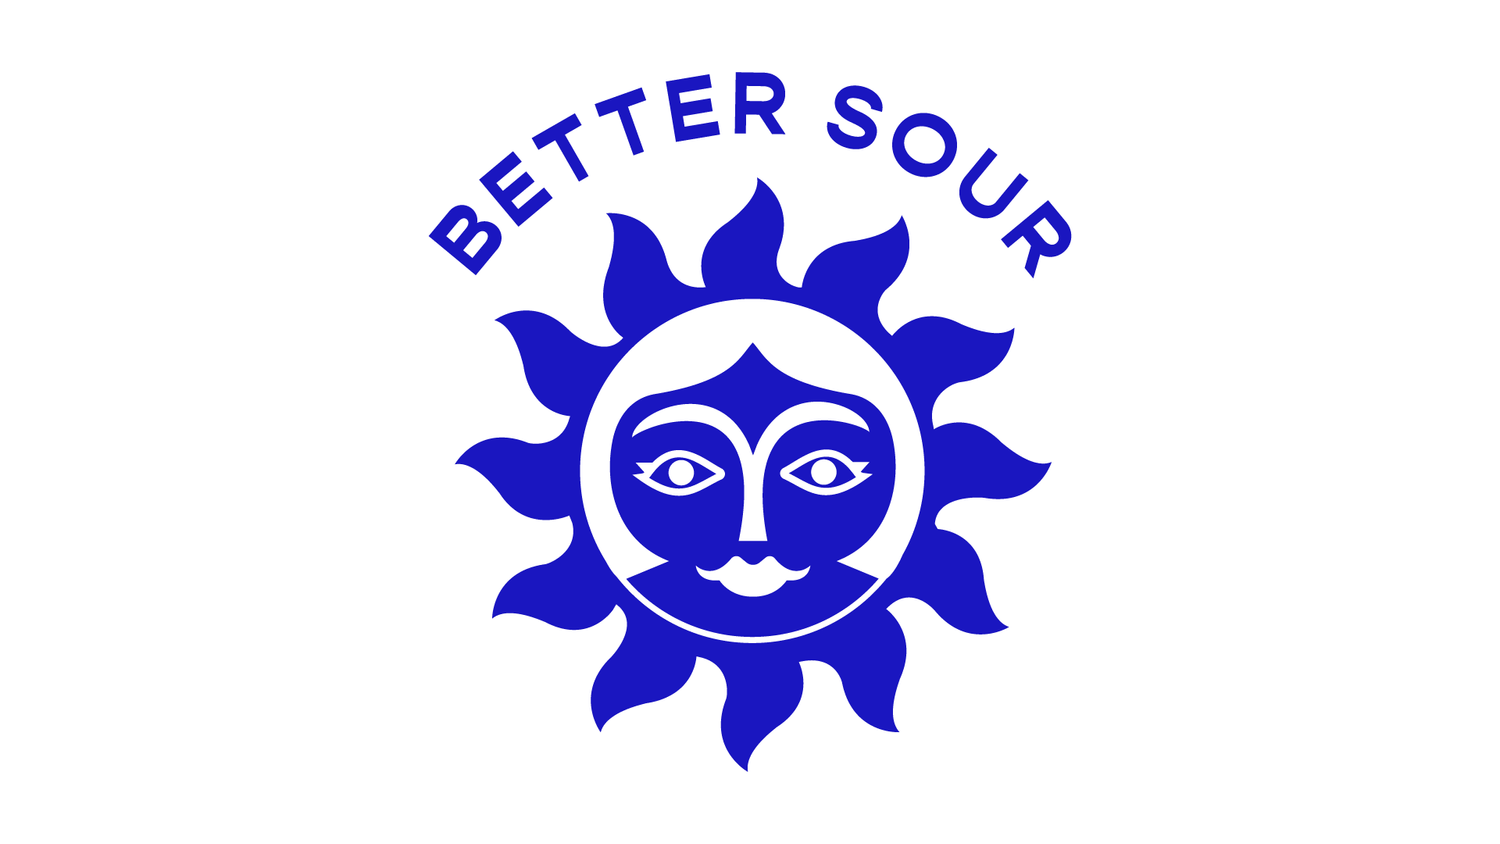 BetterSours_logo.png